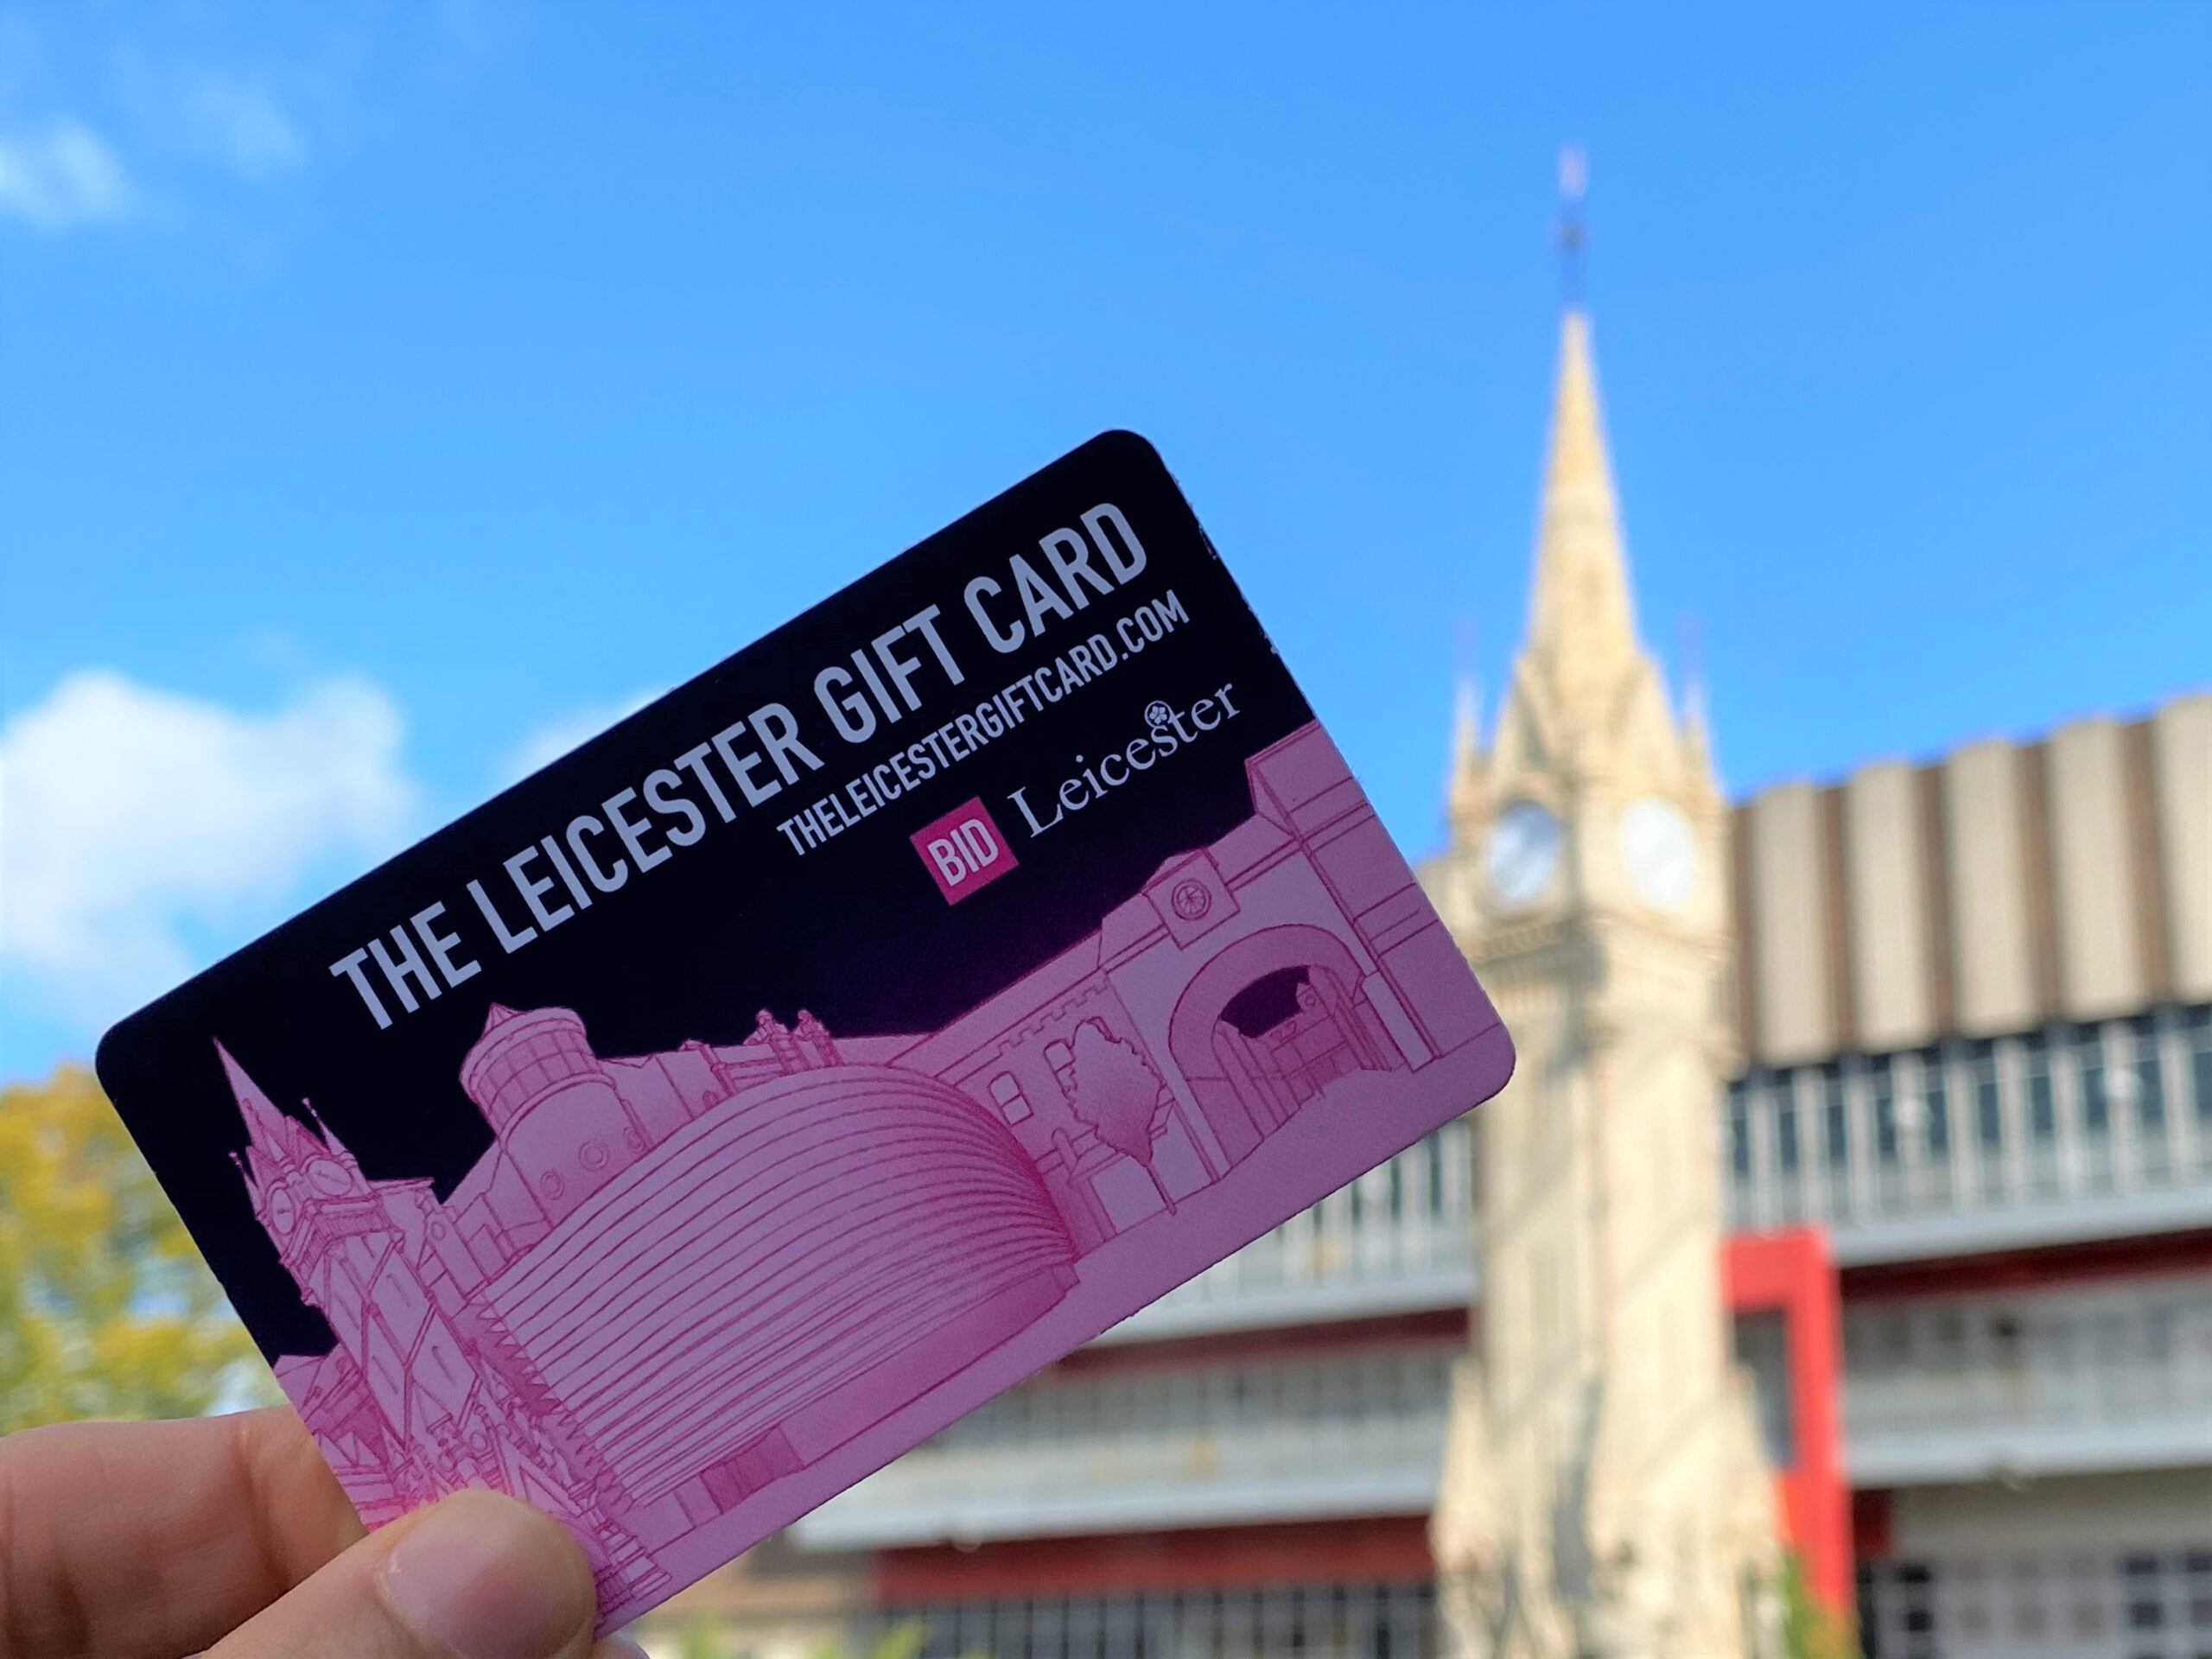 leicester gift card